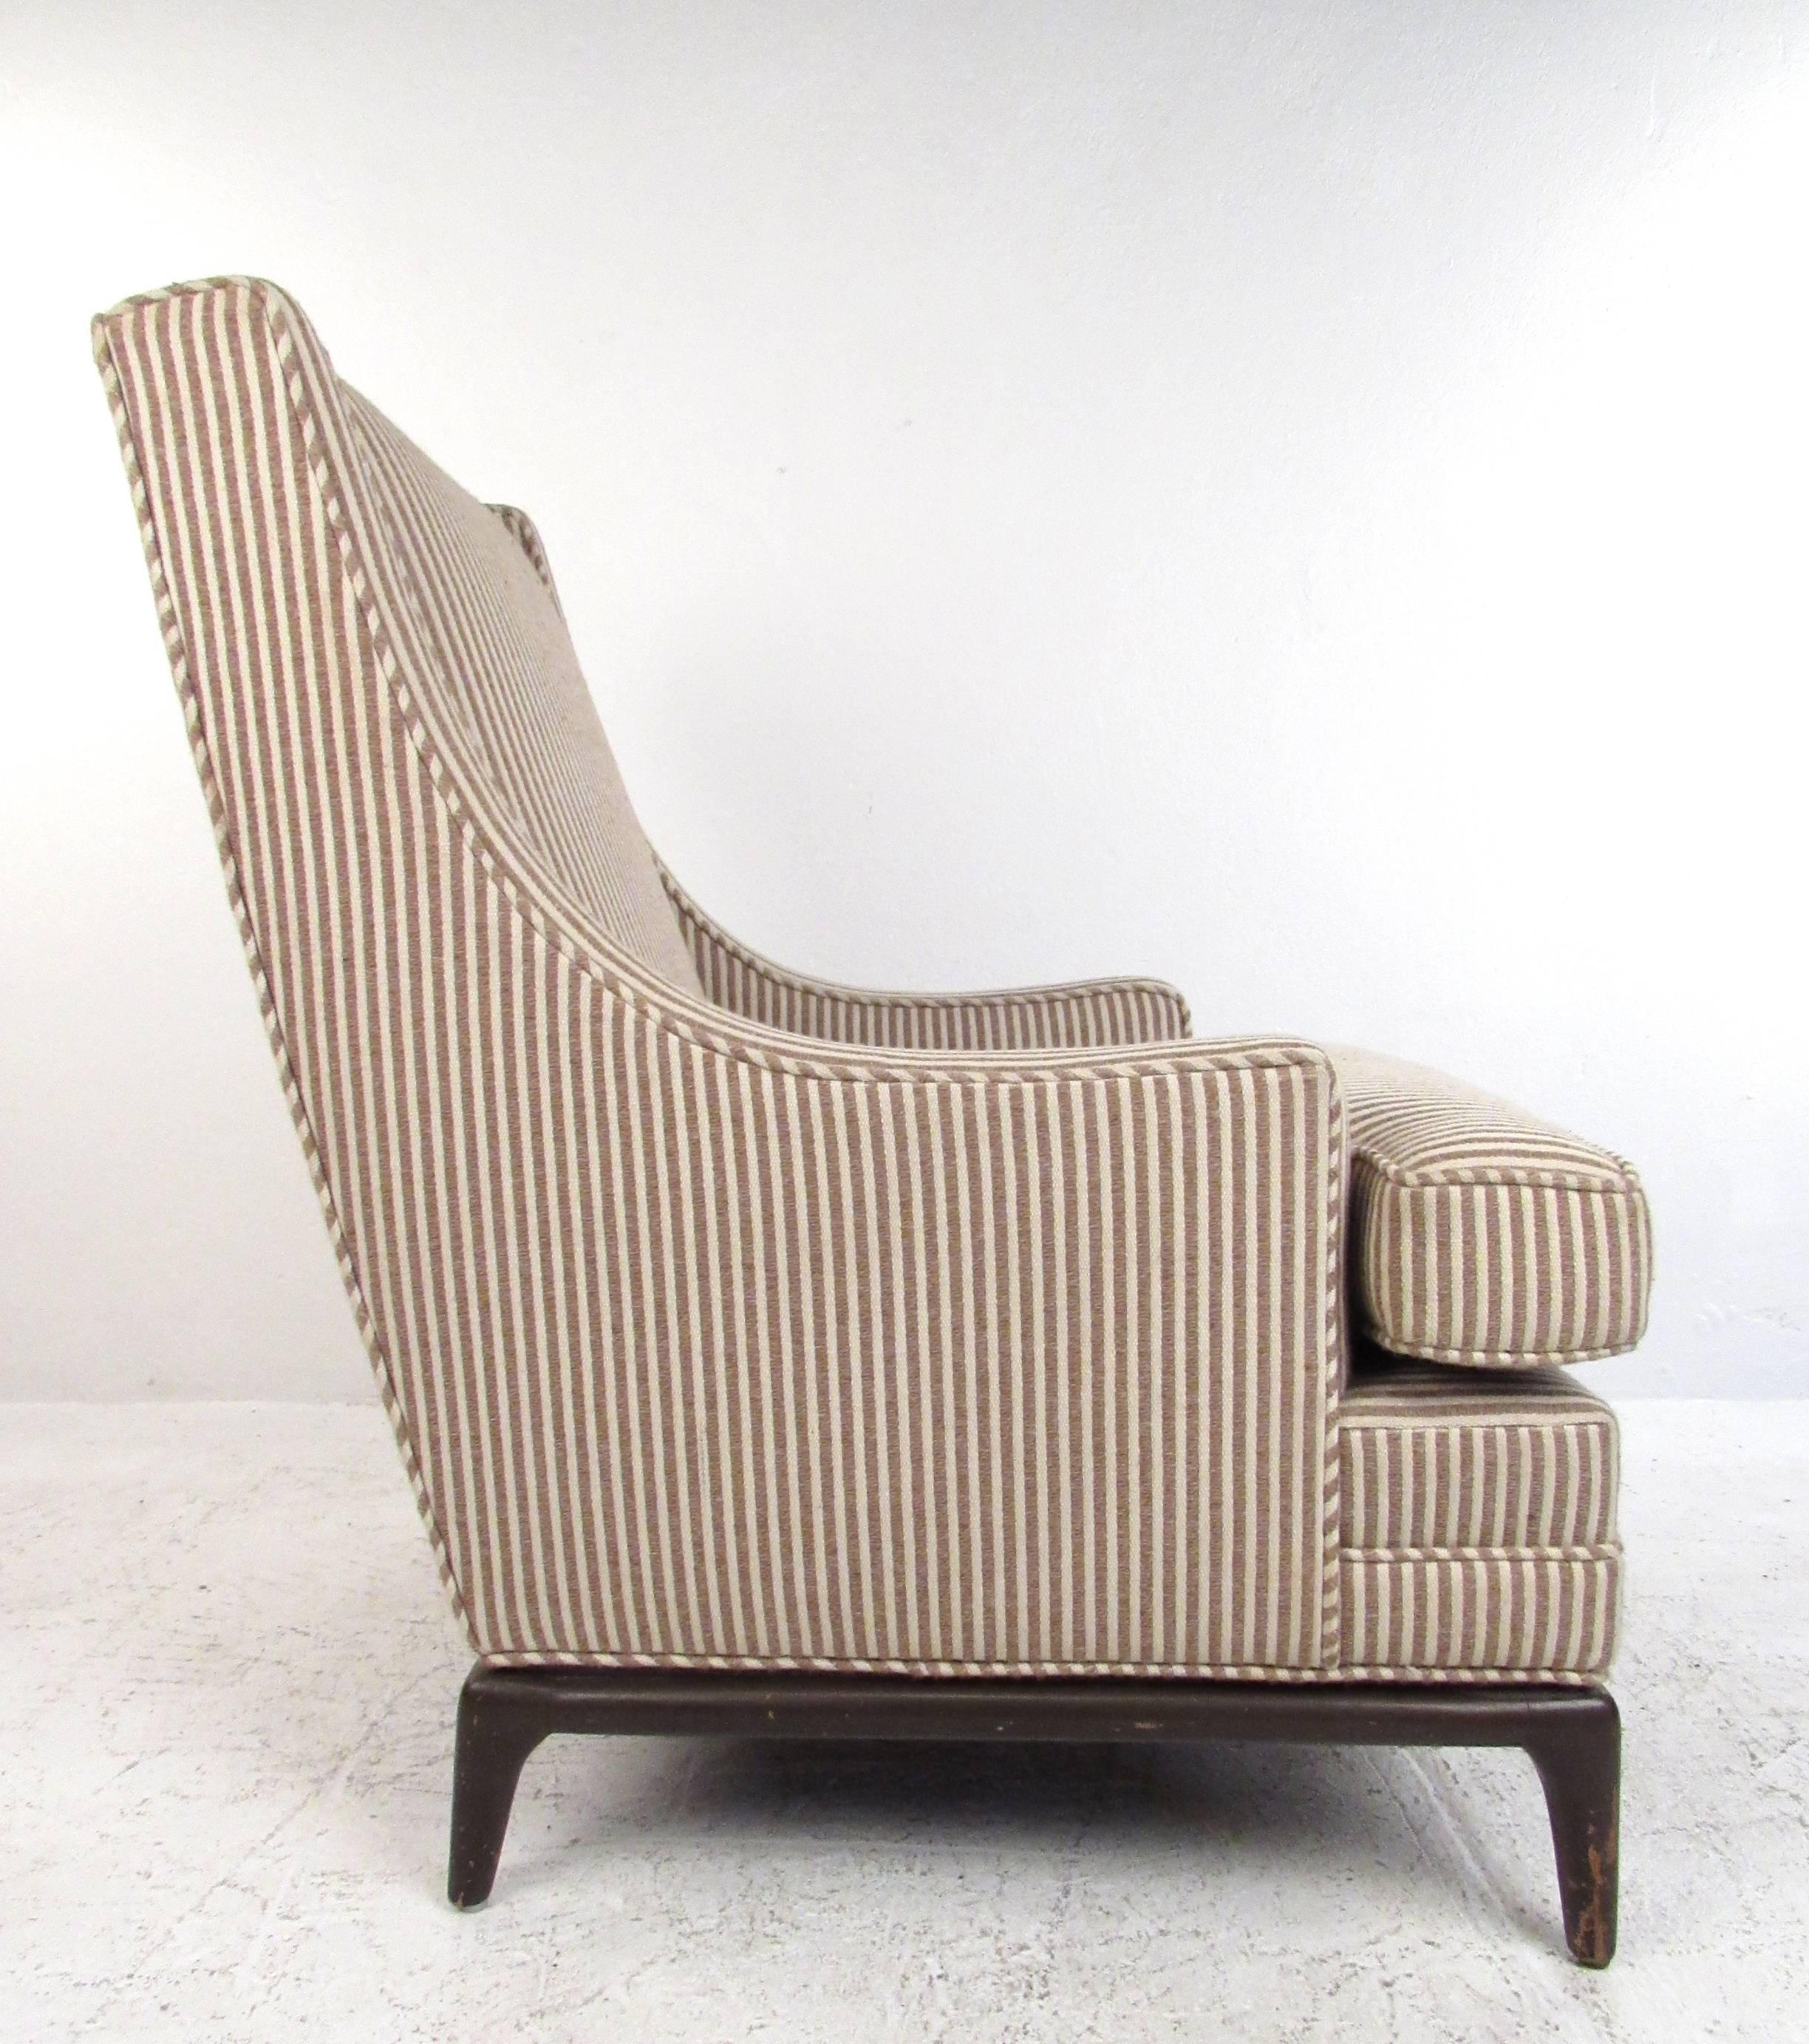 Mid-20th Century Mid-Century Modern Lounge Chair with Ottoman after Robsjohn-Gibbings